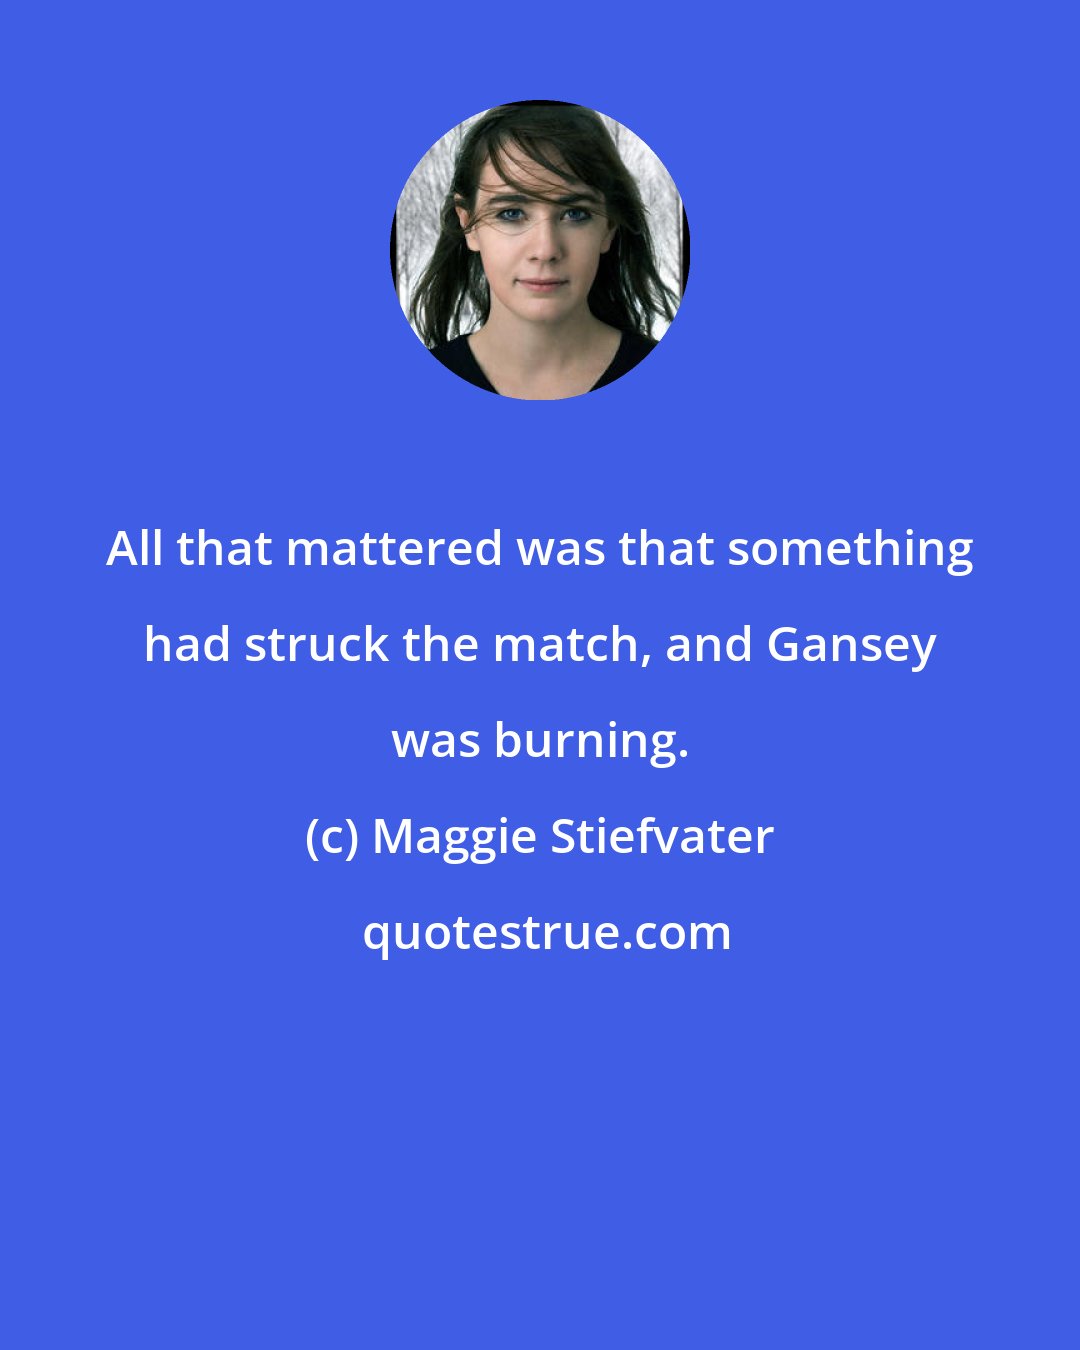 Maggie Stiefvater: All that mattered was that something had struck the match, and Gansey was burning.